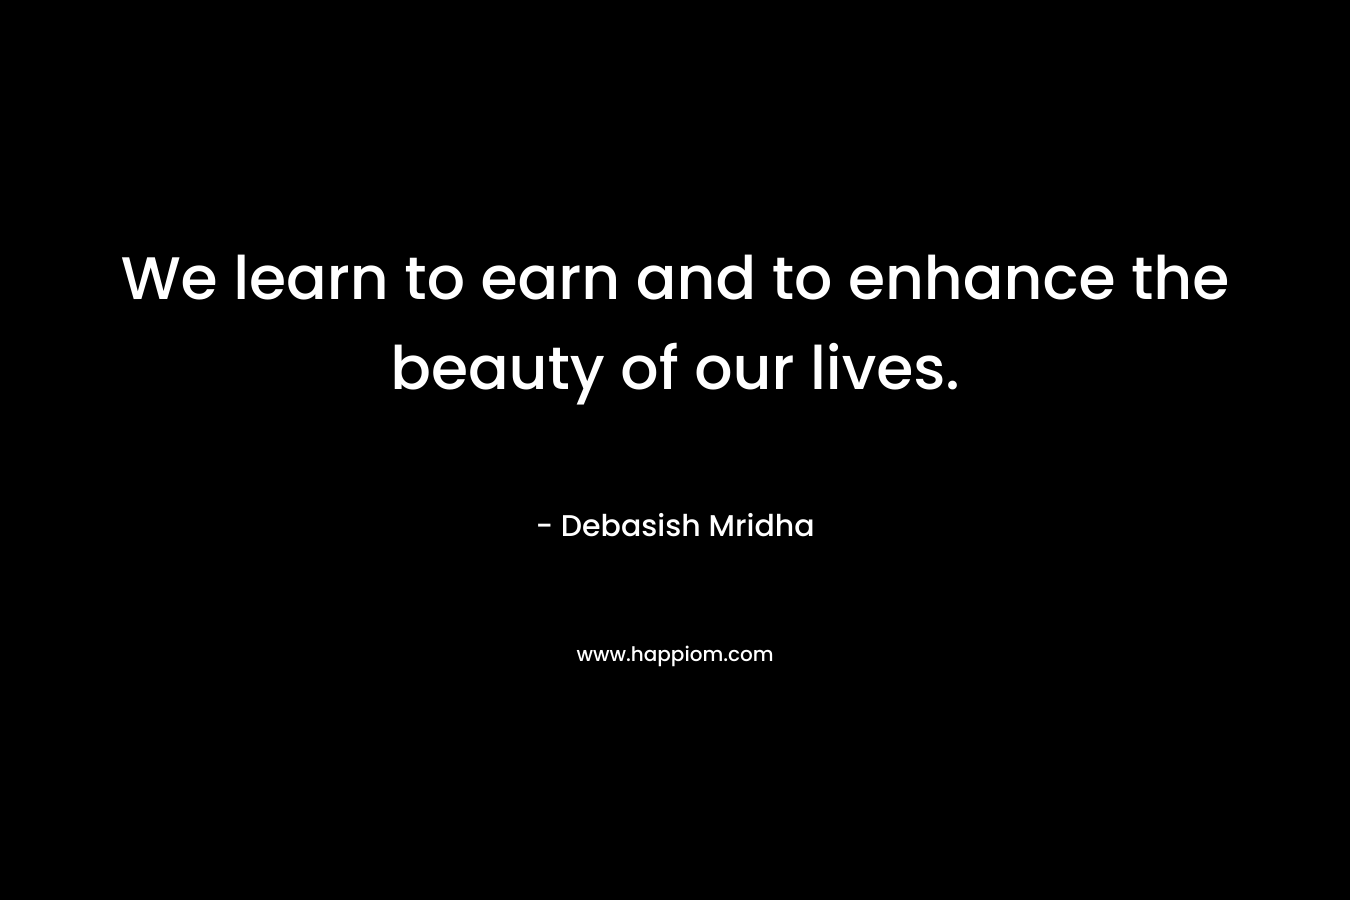 We learn to earn and to enhance the beauty of our lives.